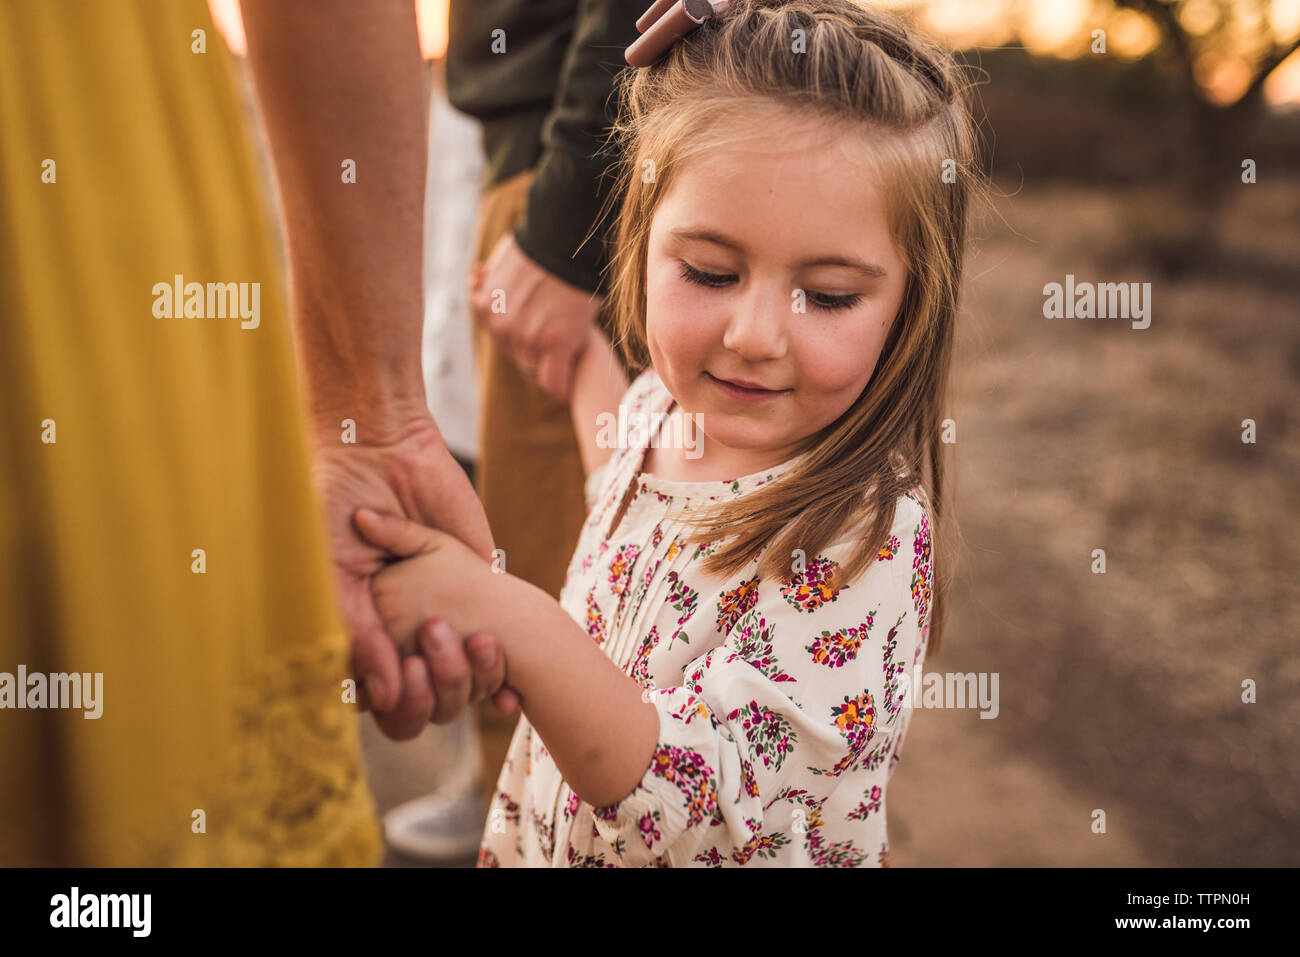 Young girl holding parents hands looking down in California field Stock Photo